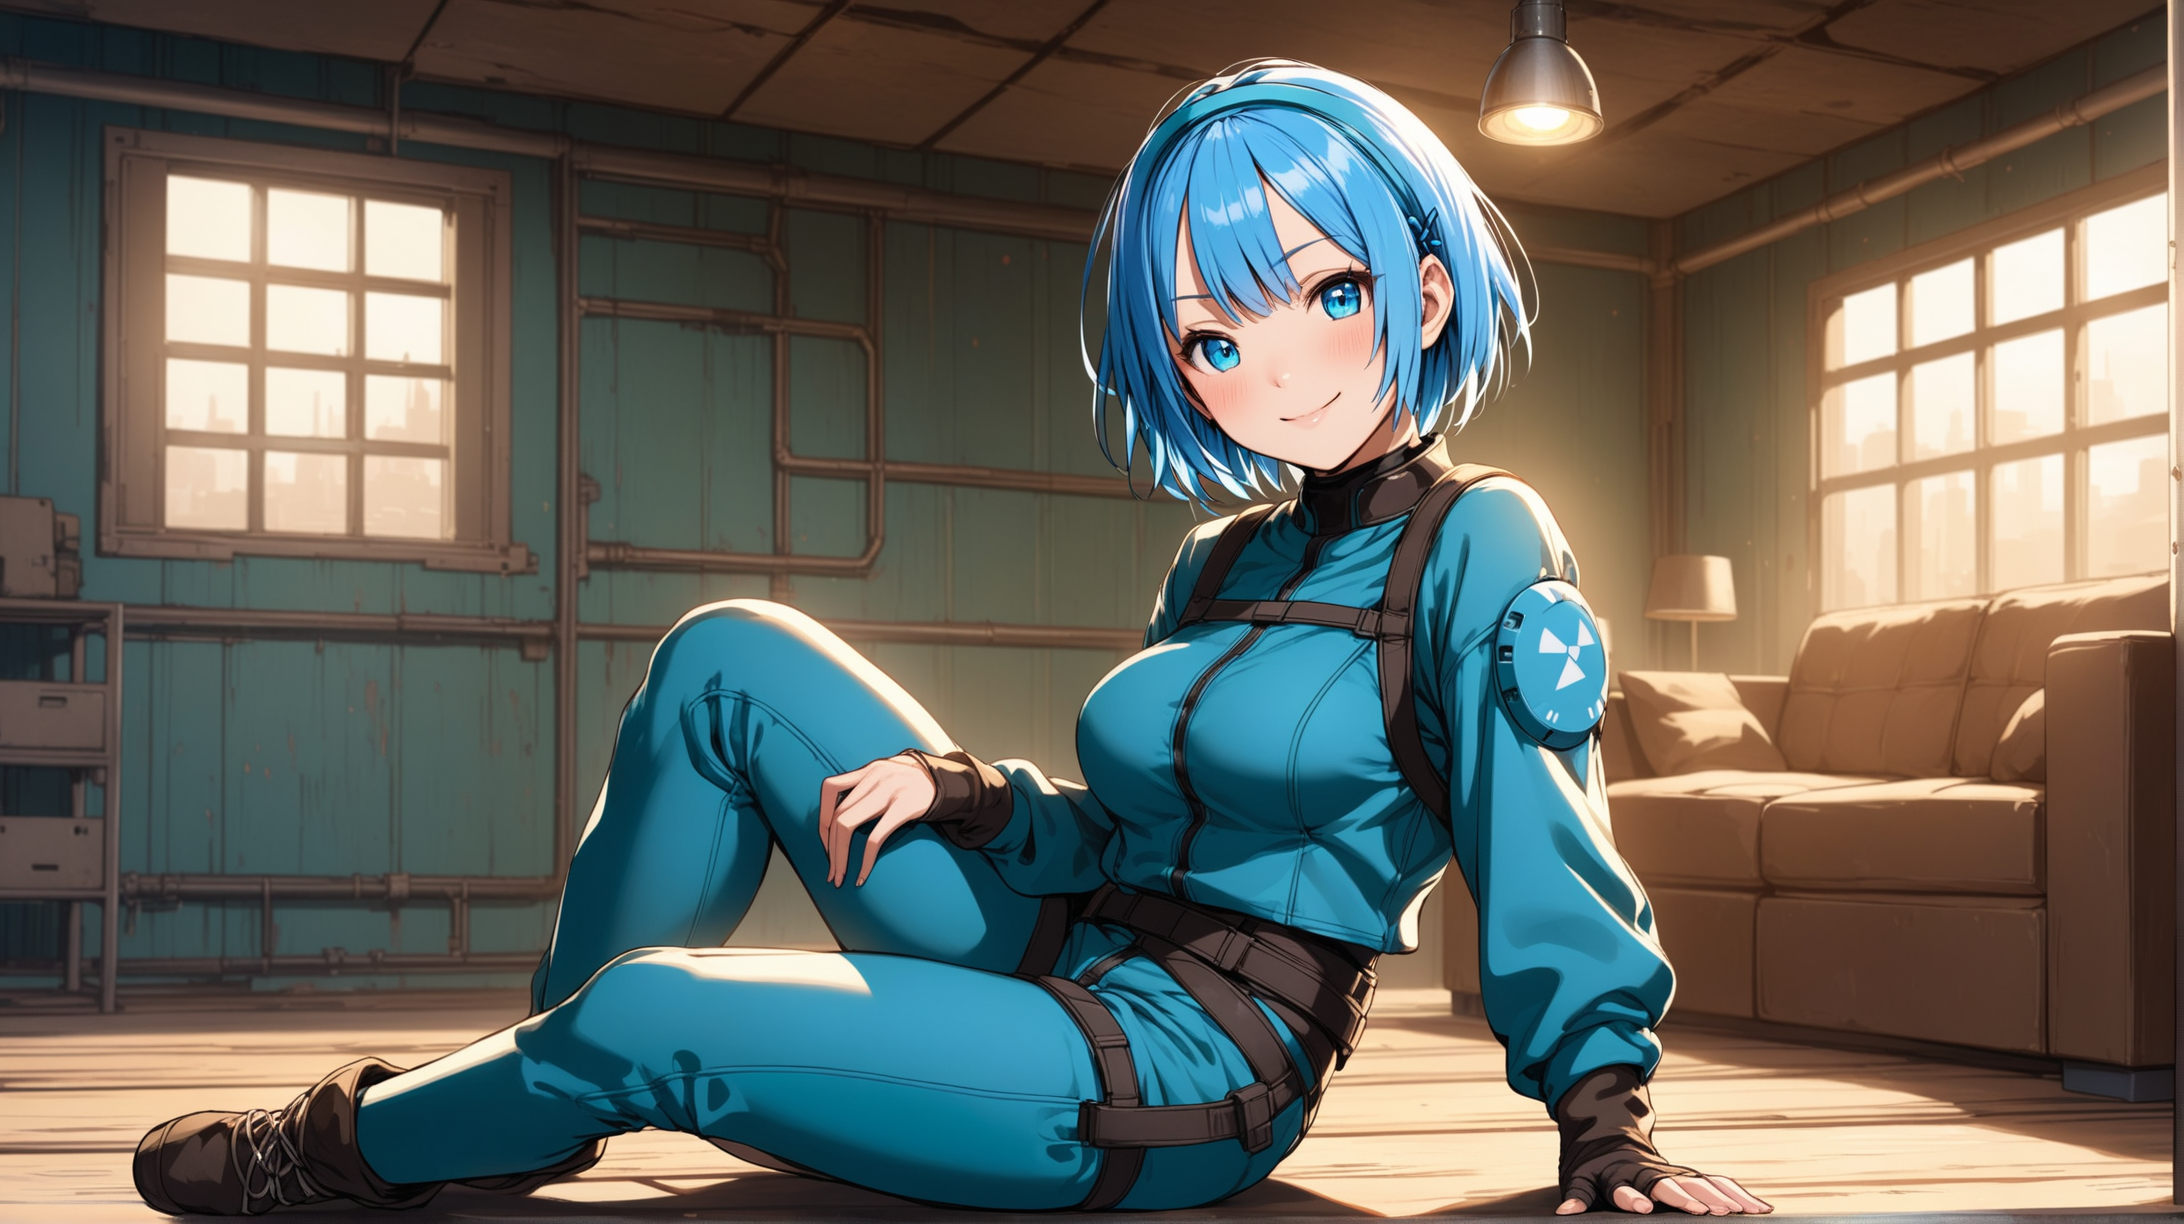 Rem Character Art Relaxed Pose Indoors Inspired by Fallout Series